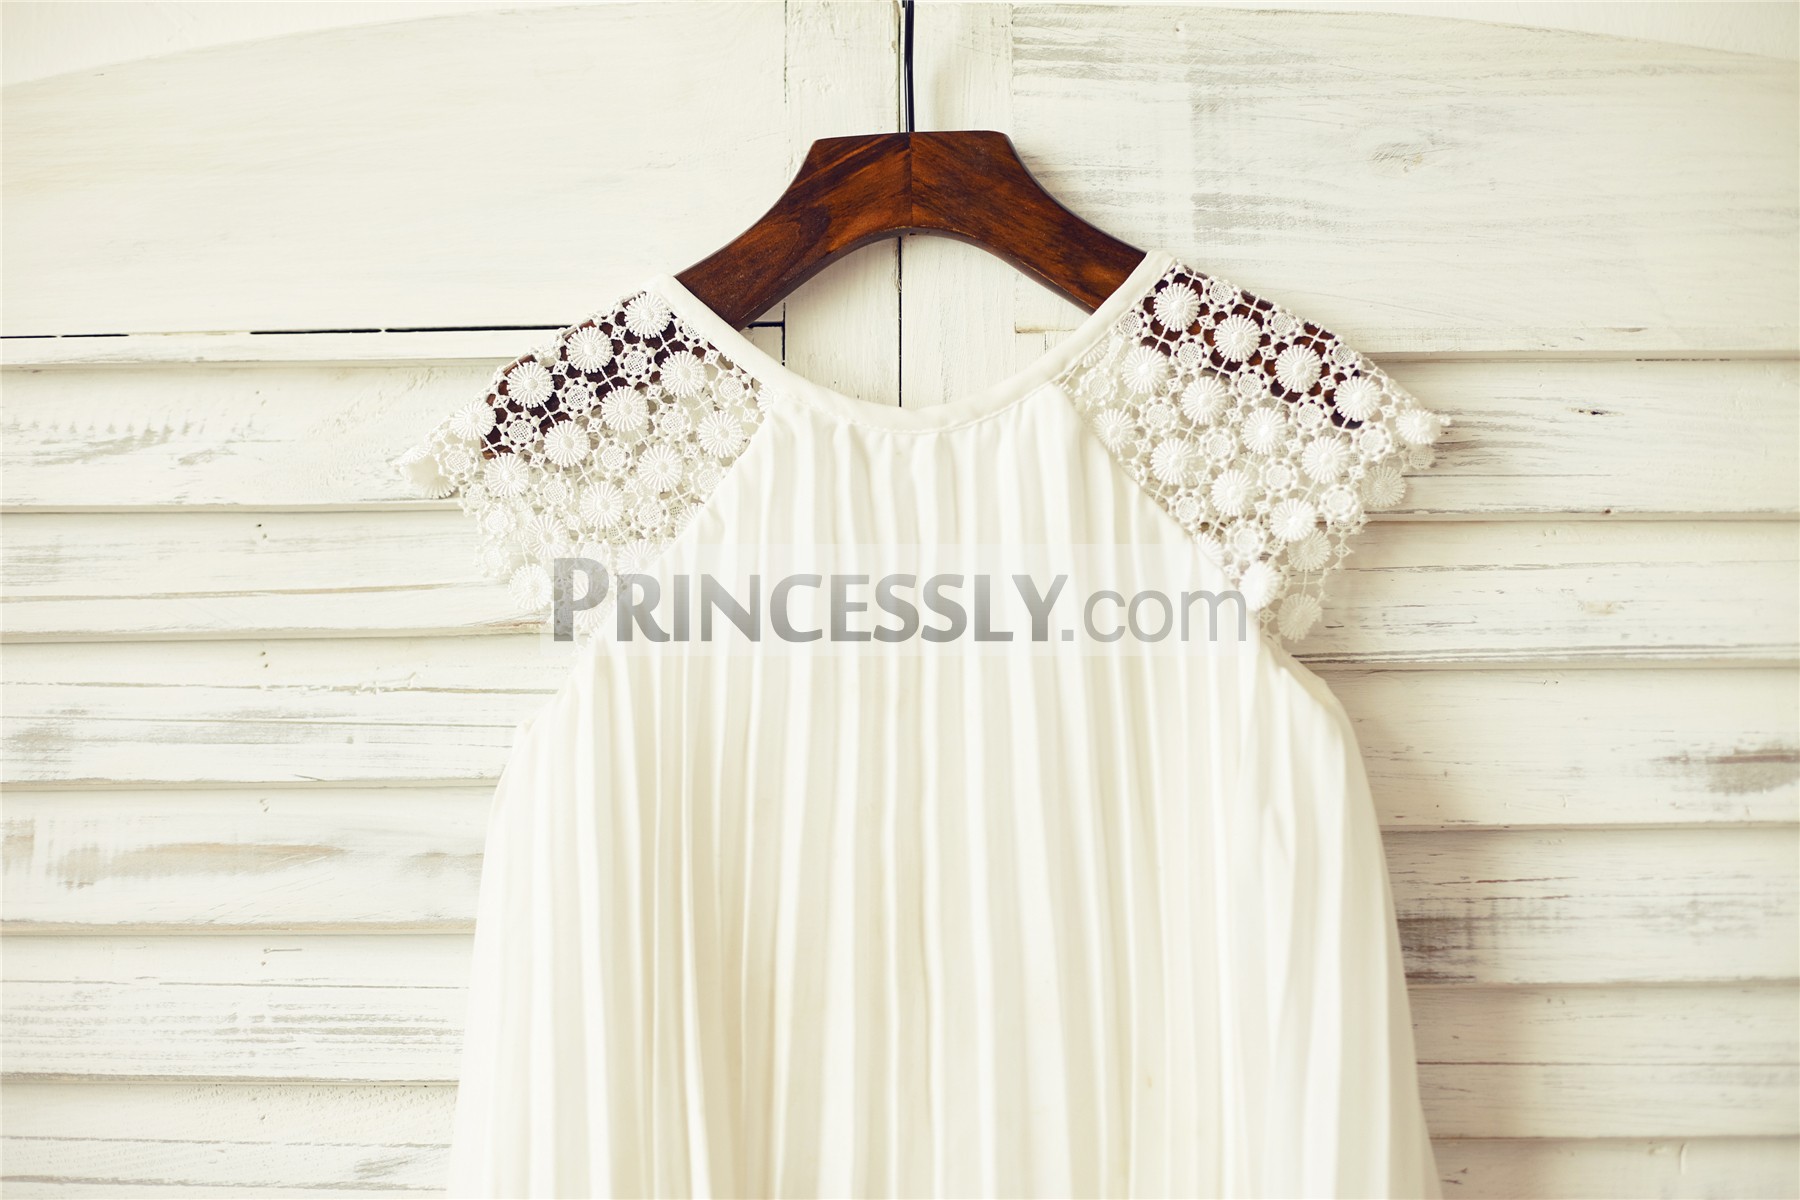 Hollow-out lace cap sleeves and round neckline features 